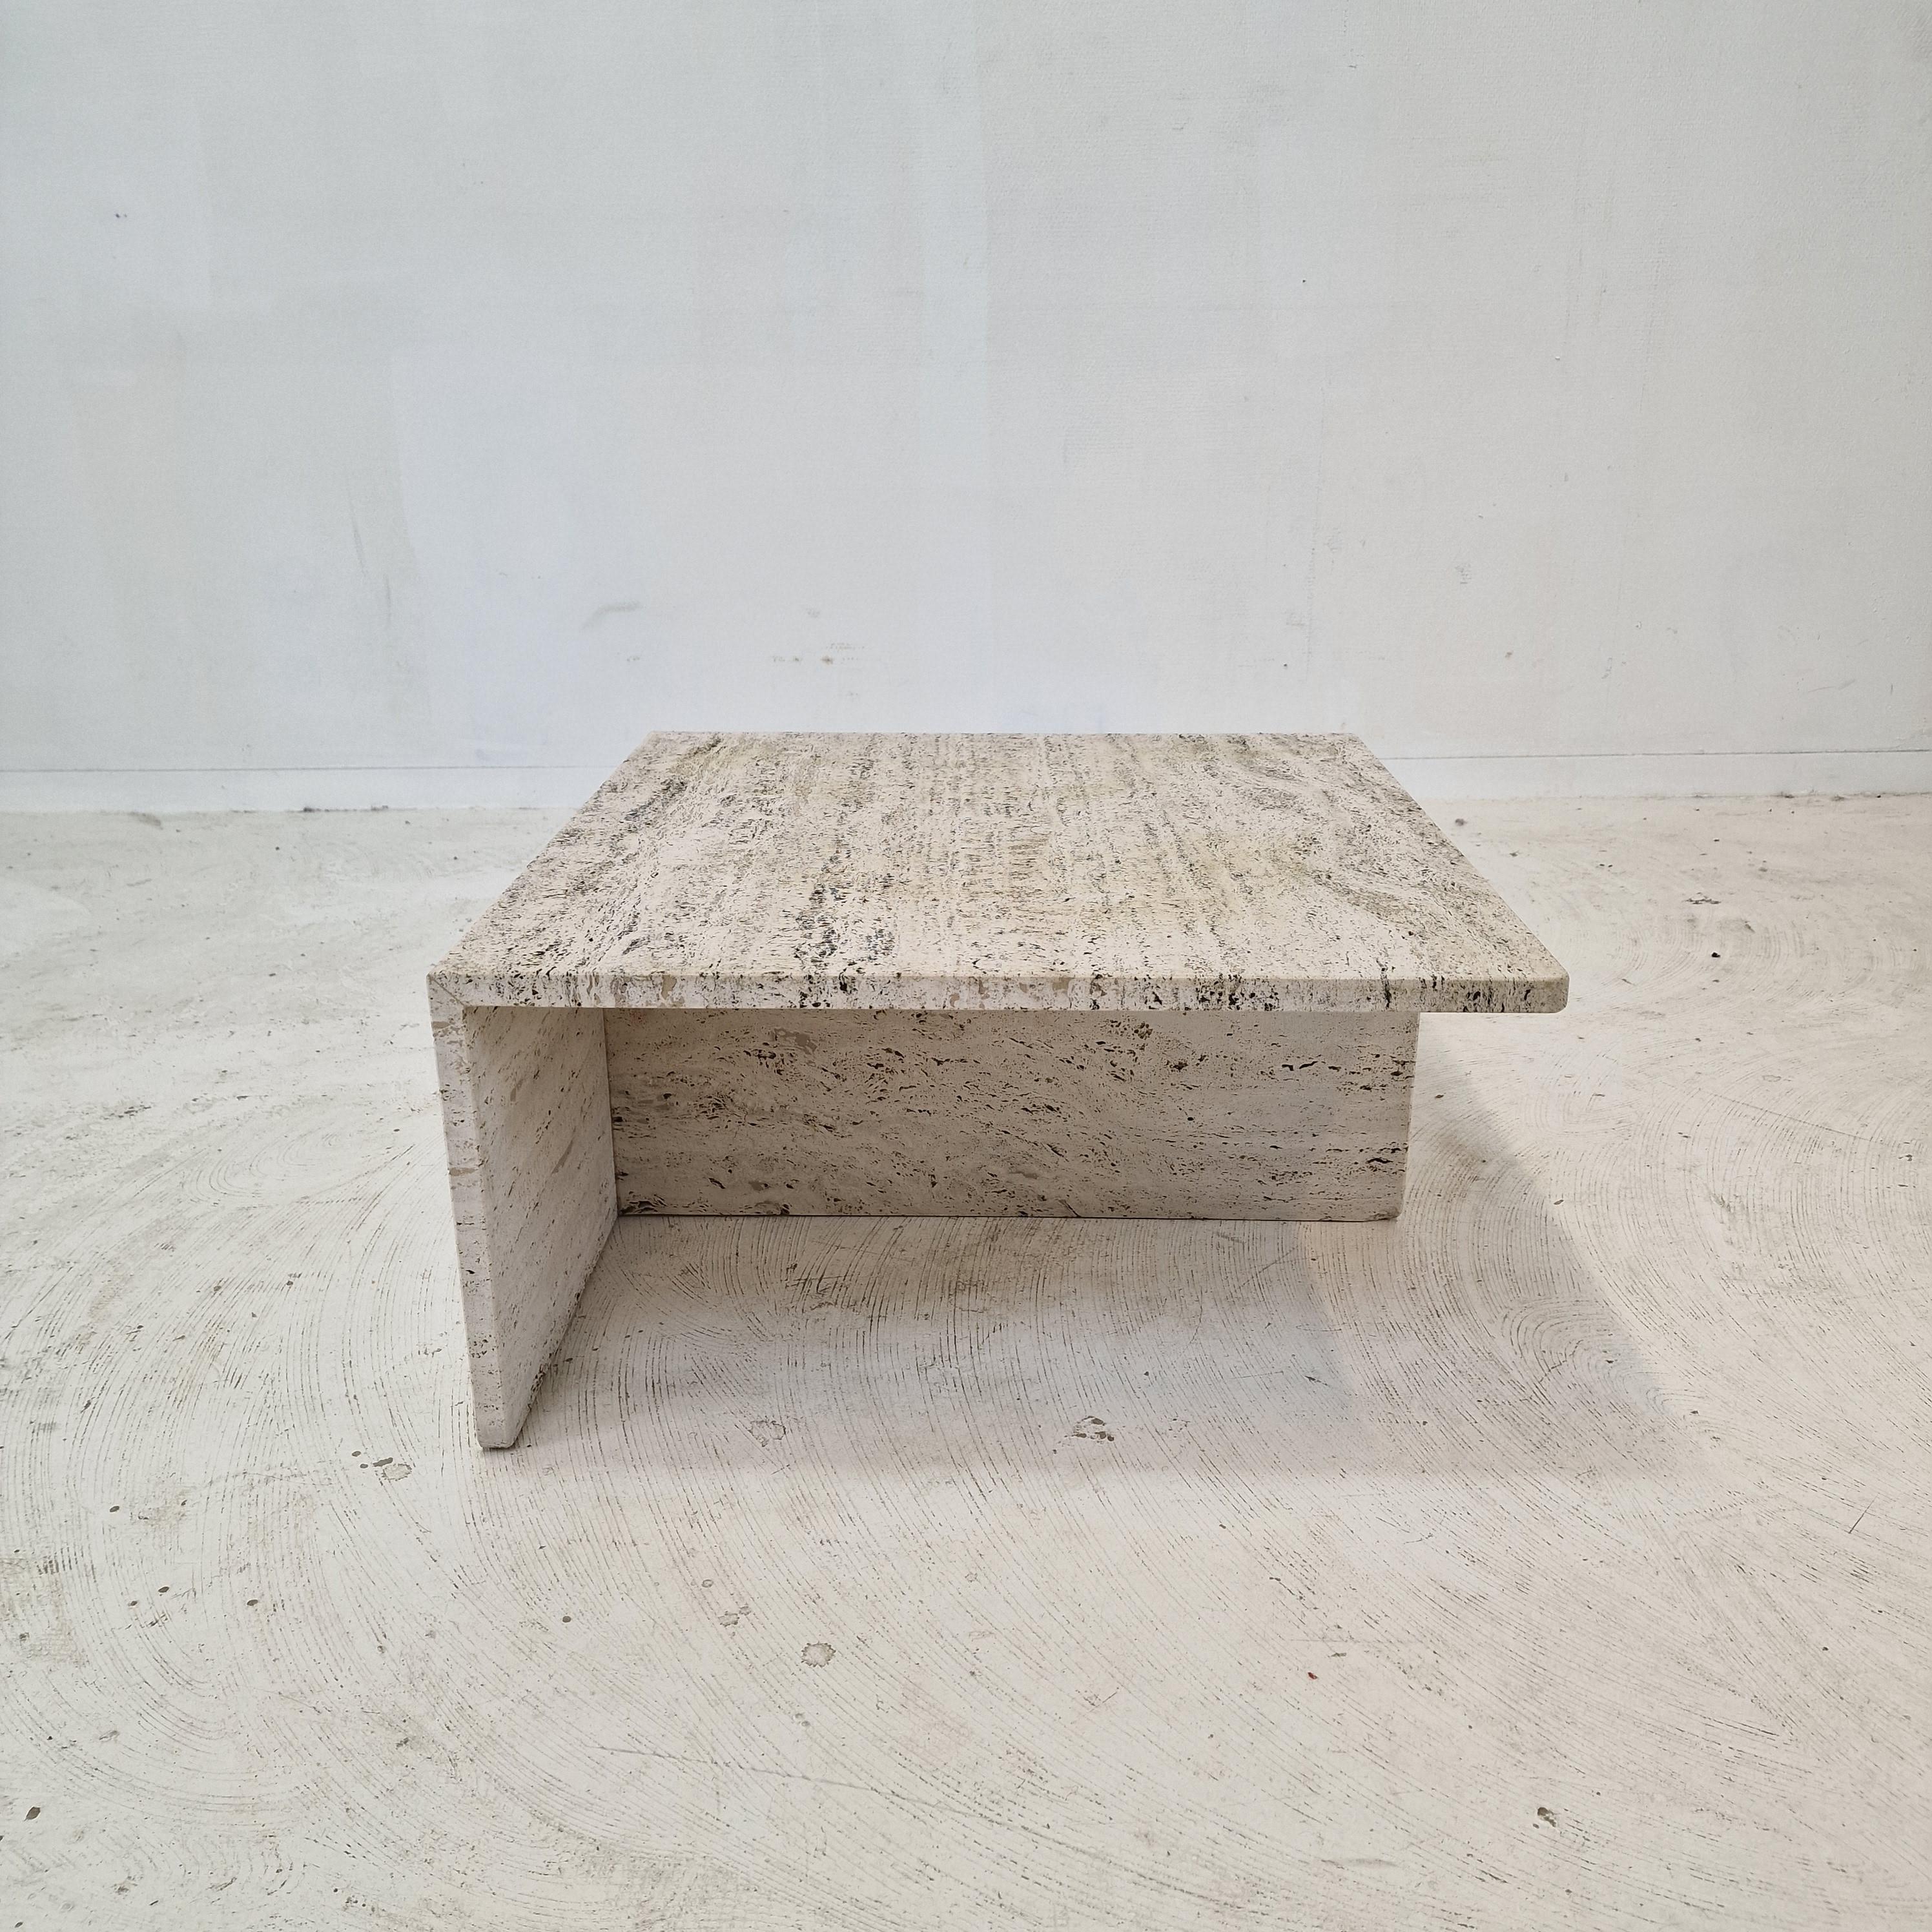 This very nice coffee or side table is made by the Italian company Up & Up in the 1970's.

It is handcrafted out of beautiful rough travertine. 
Please take notice of the very nice patterns and the round finishing of the corners.

It has the normal